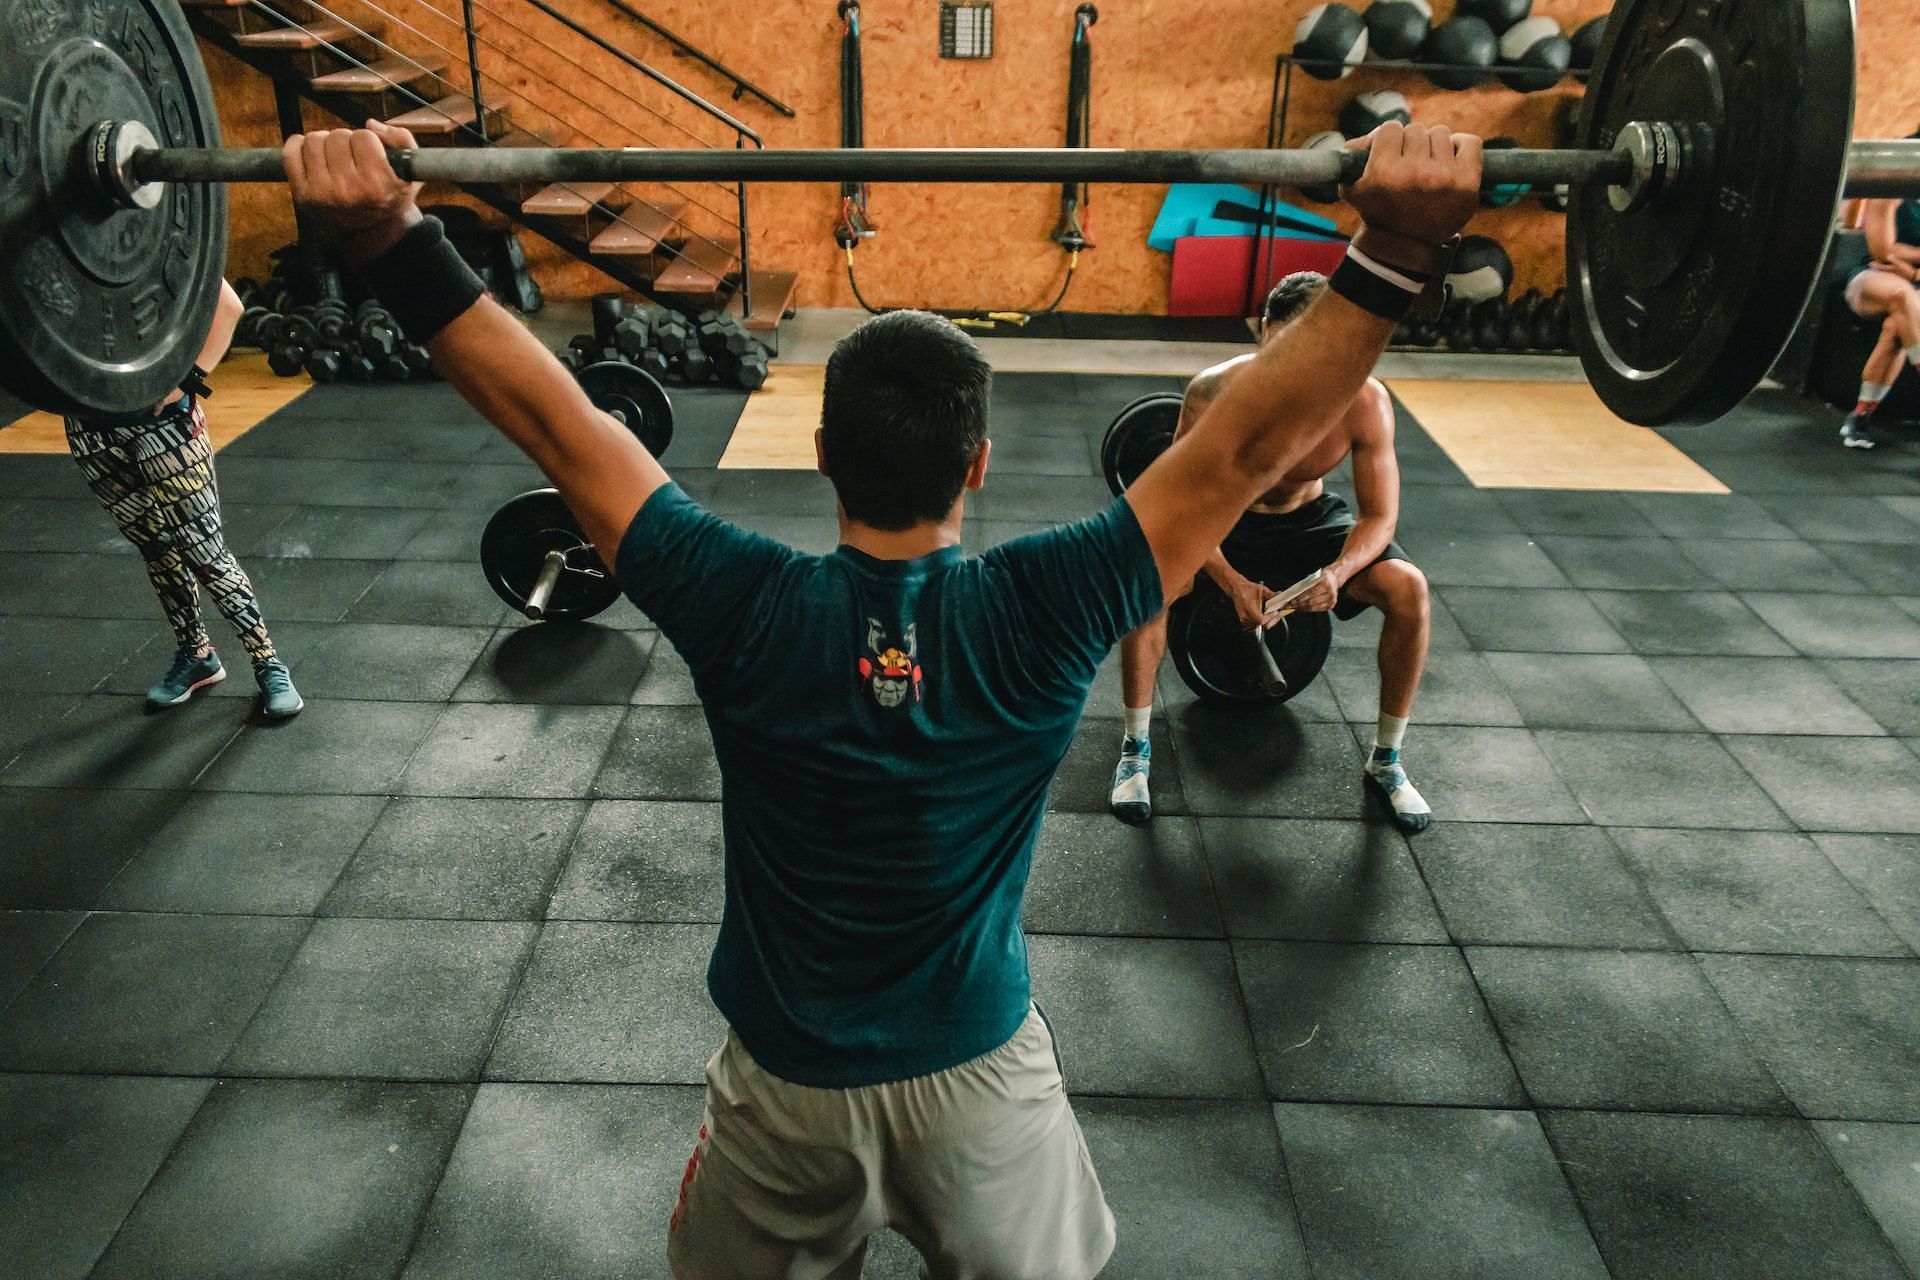 Barbell overhead movements are a great back strengthening move. (Photo via Pexels/Victor Freitas)